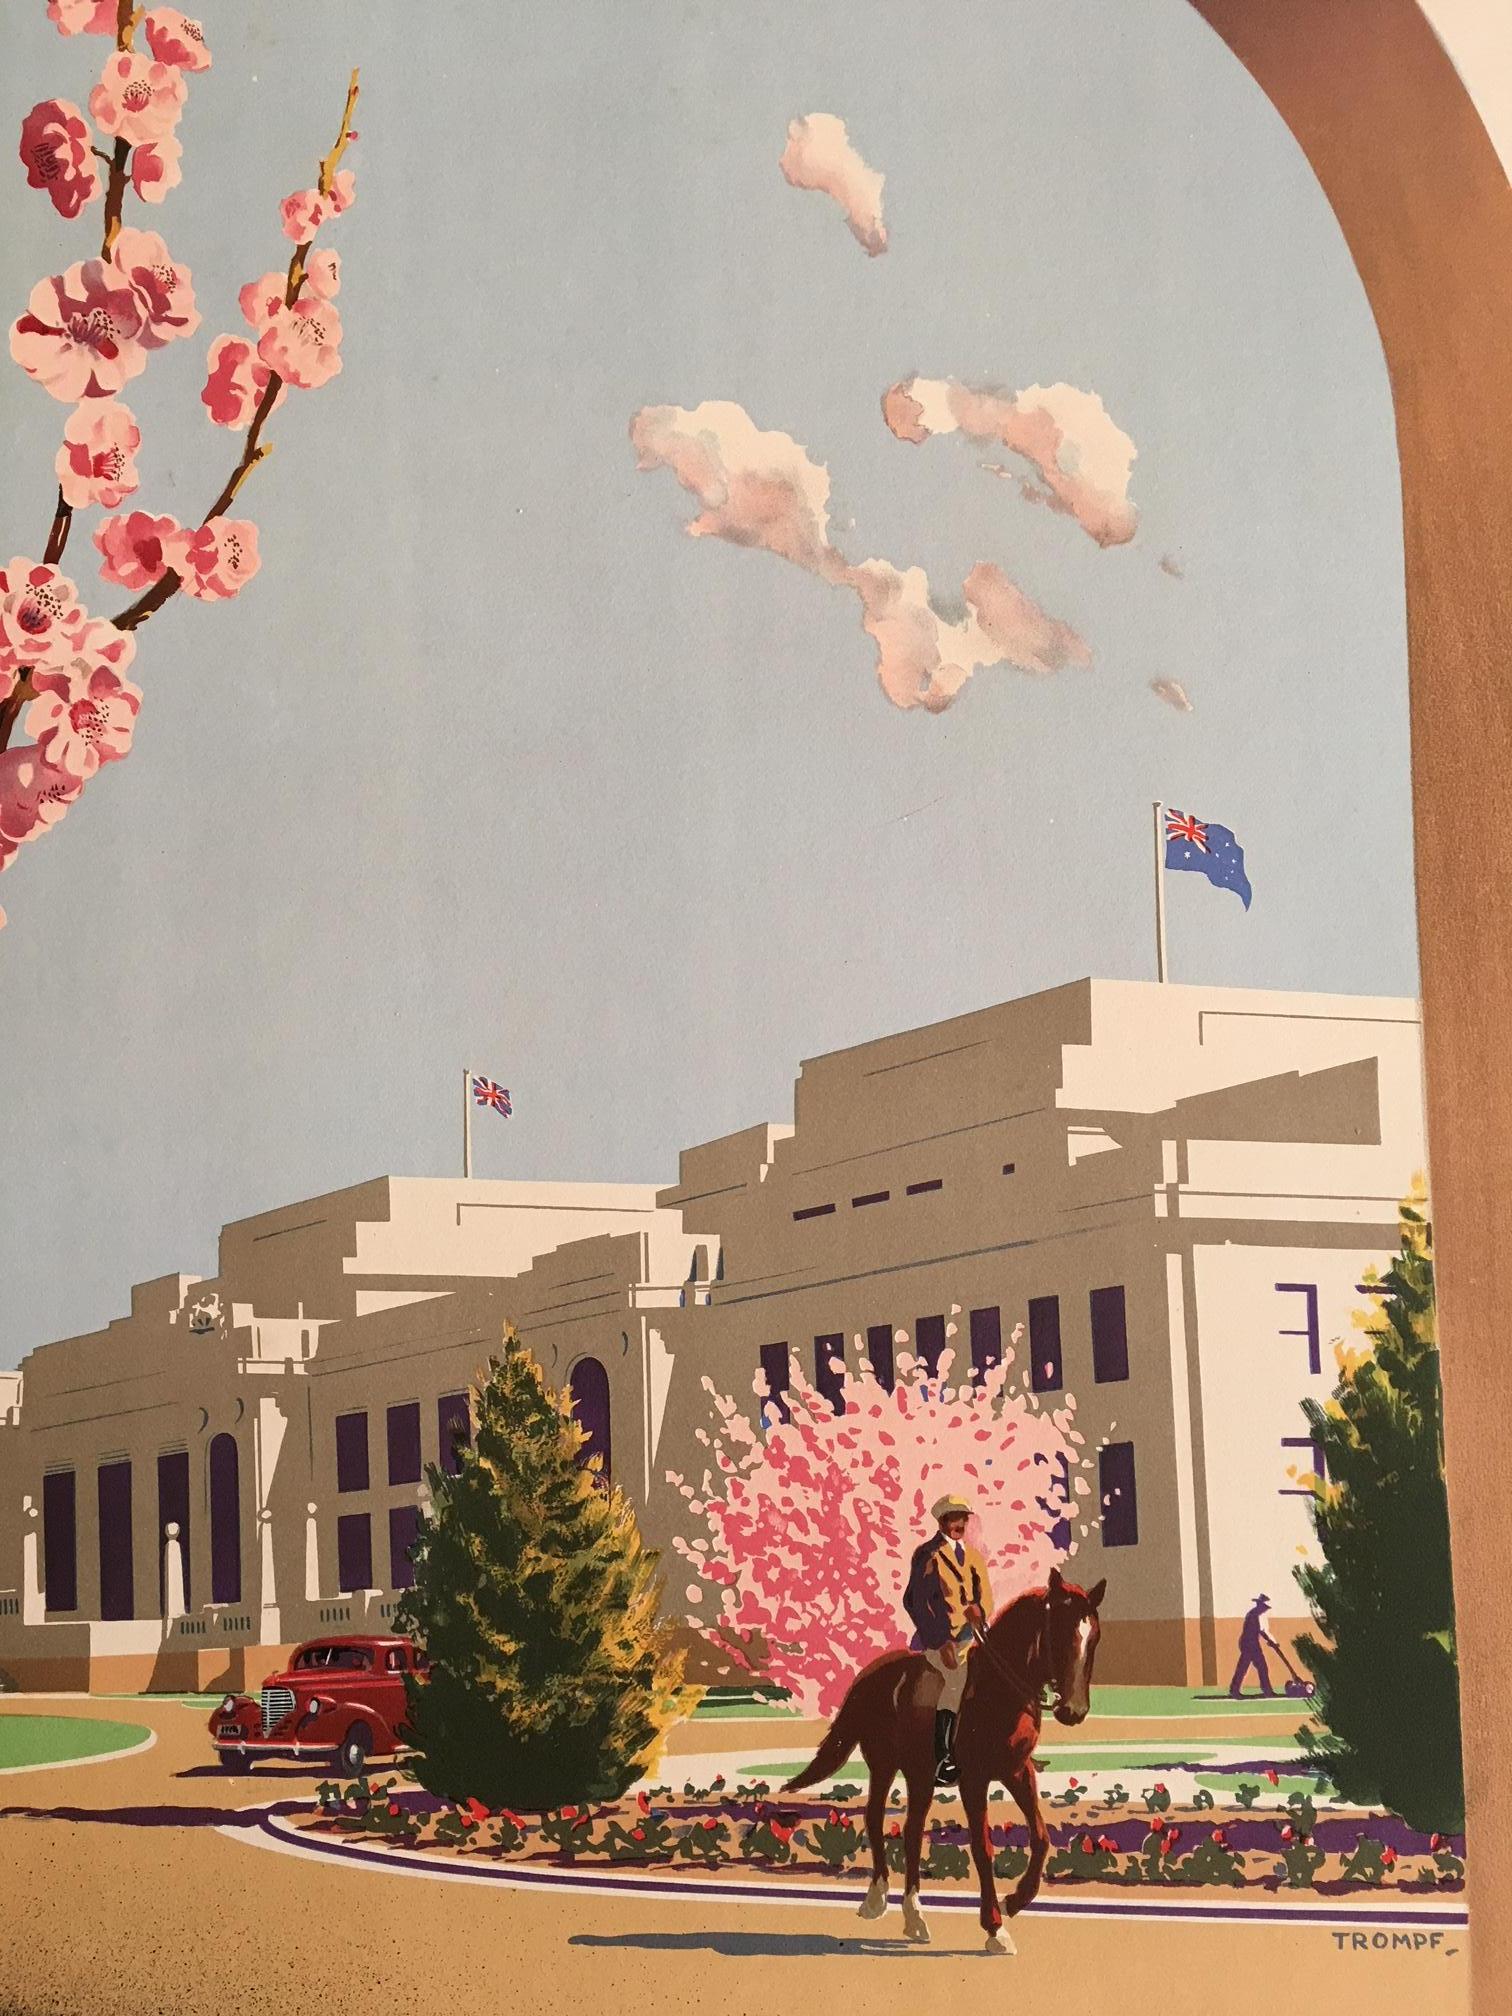 Art Deco Original Vintage Poster, Canberra Australian Capital Territory by Trompf, 1930 For Sale